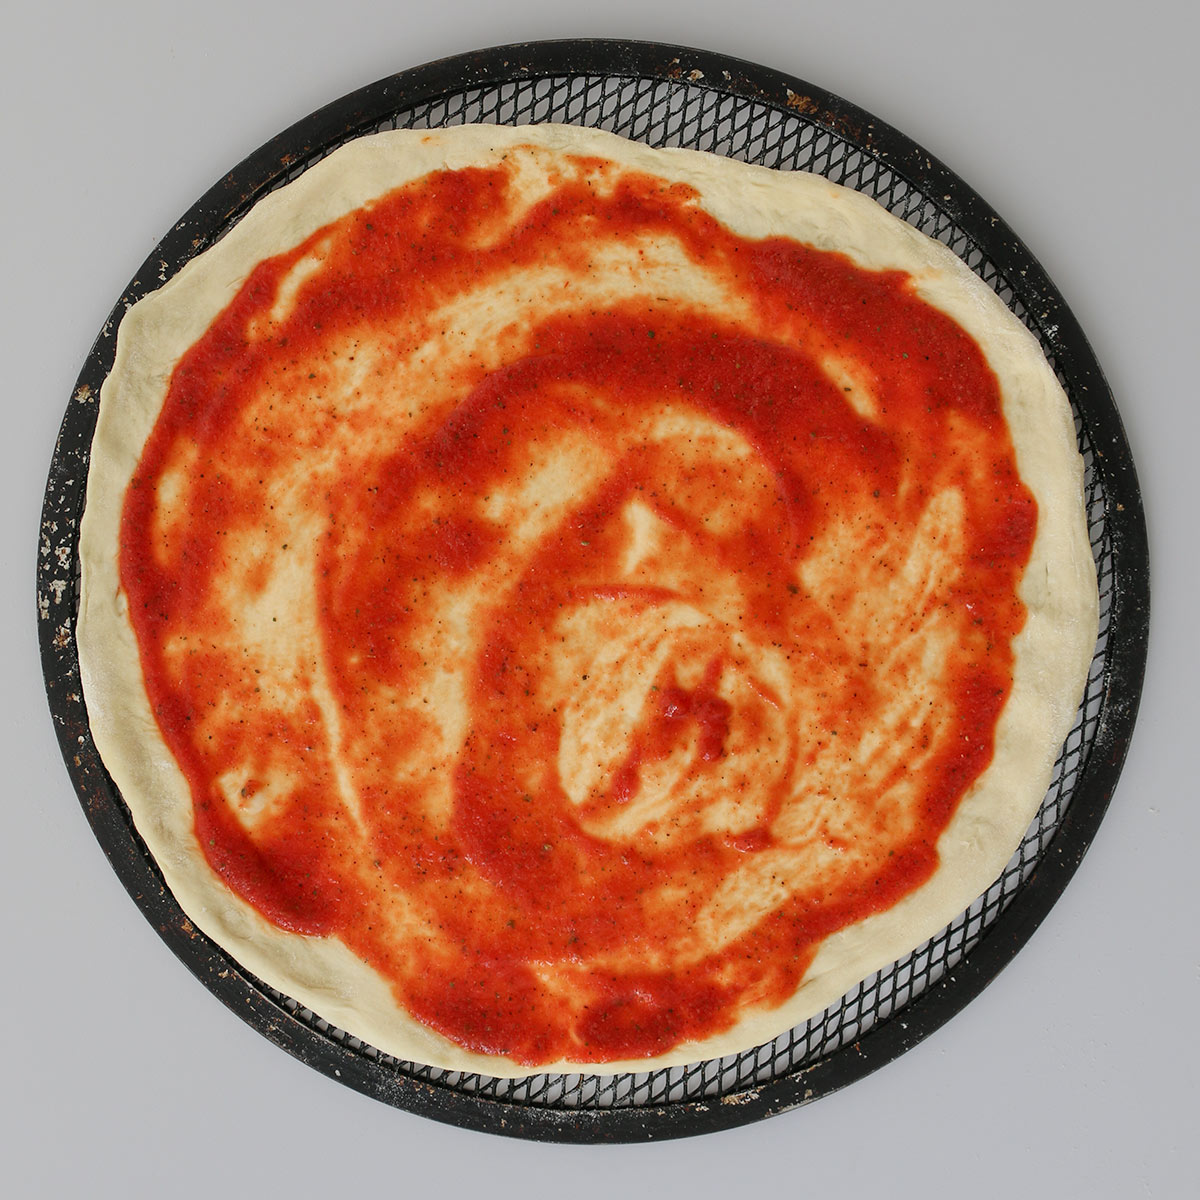 round of pizza dough spread with pizza sauce.